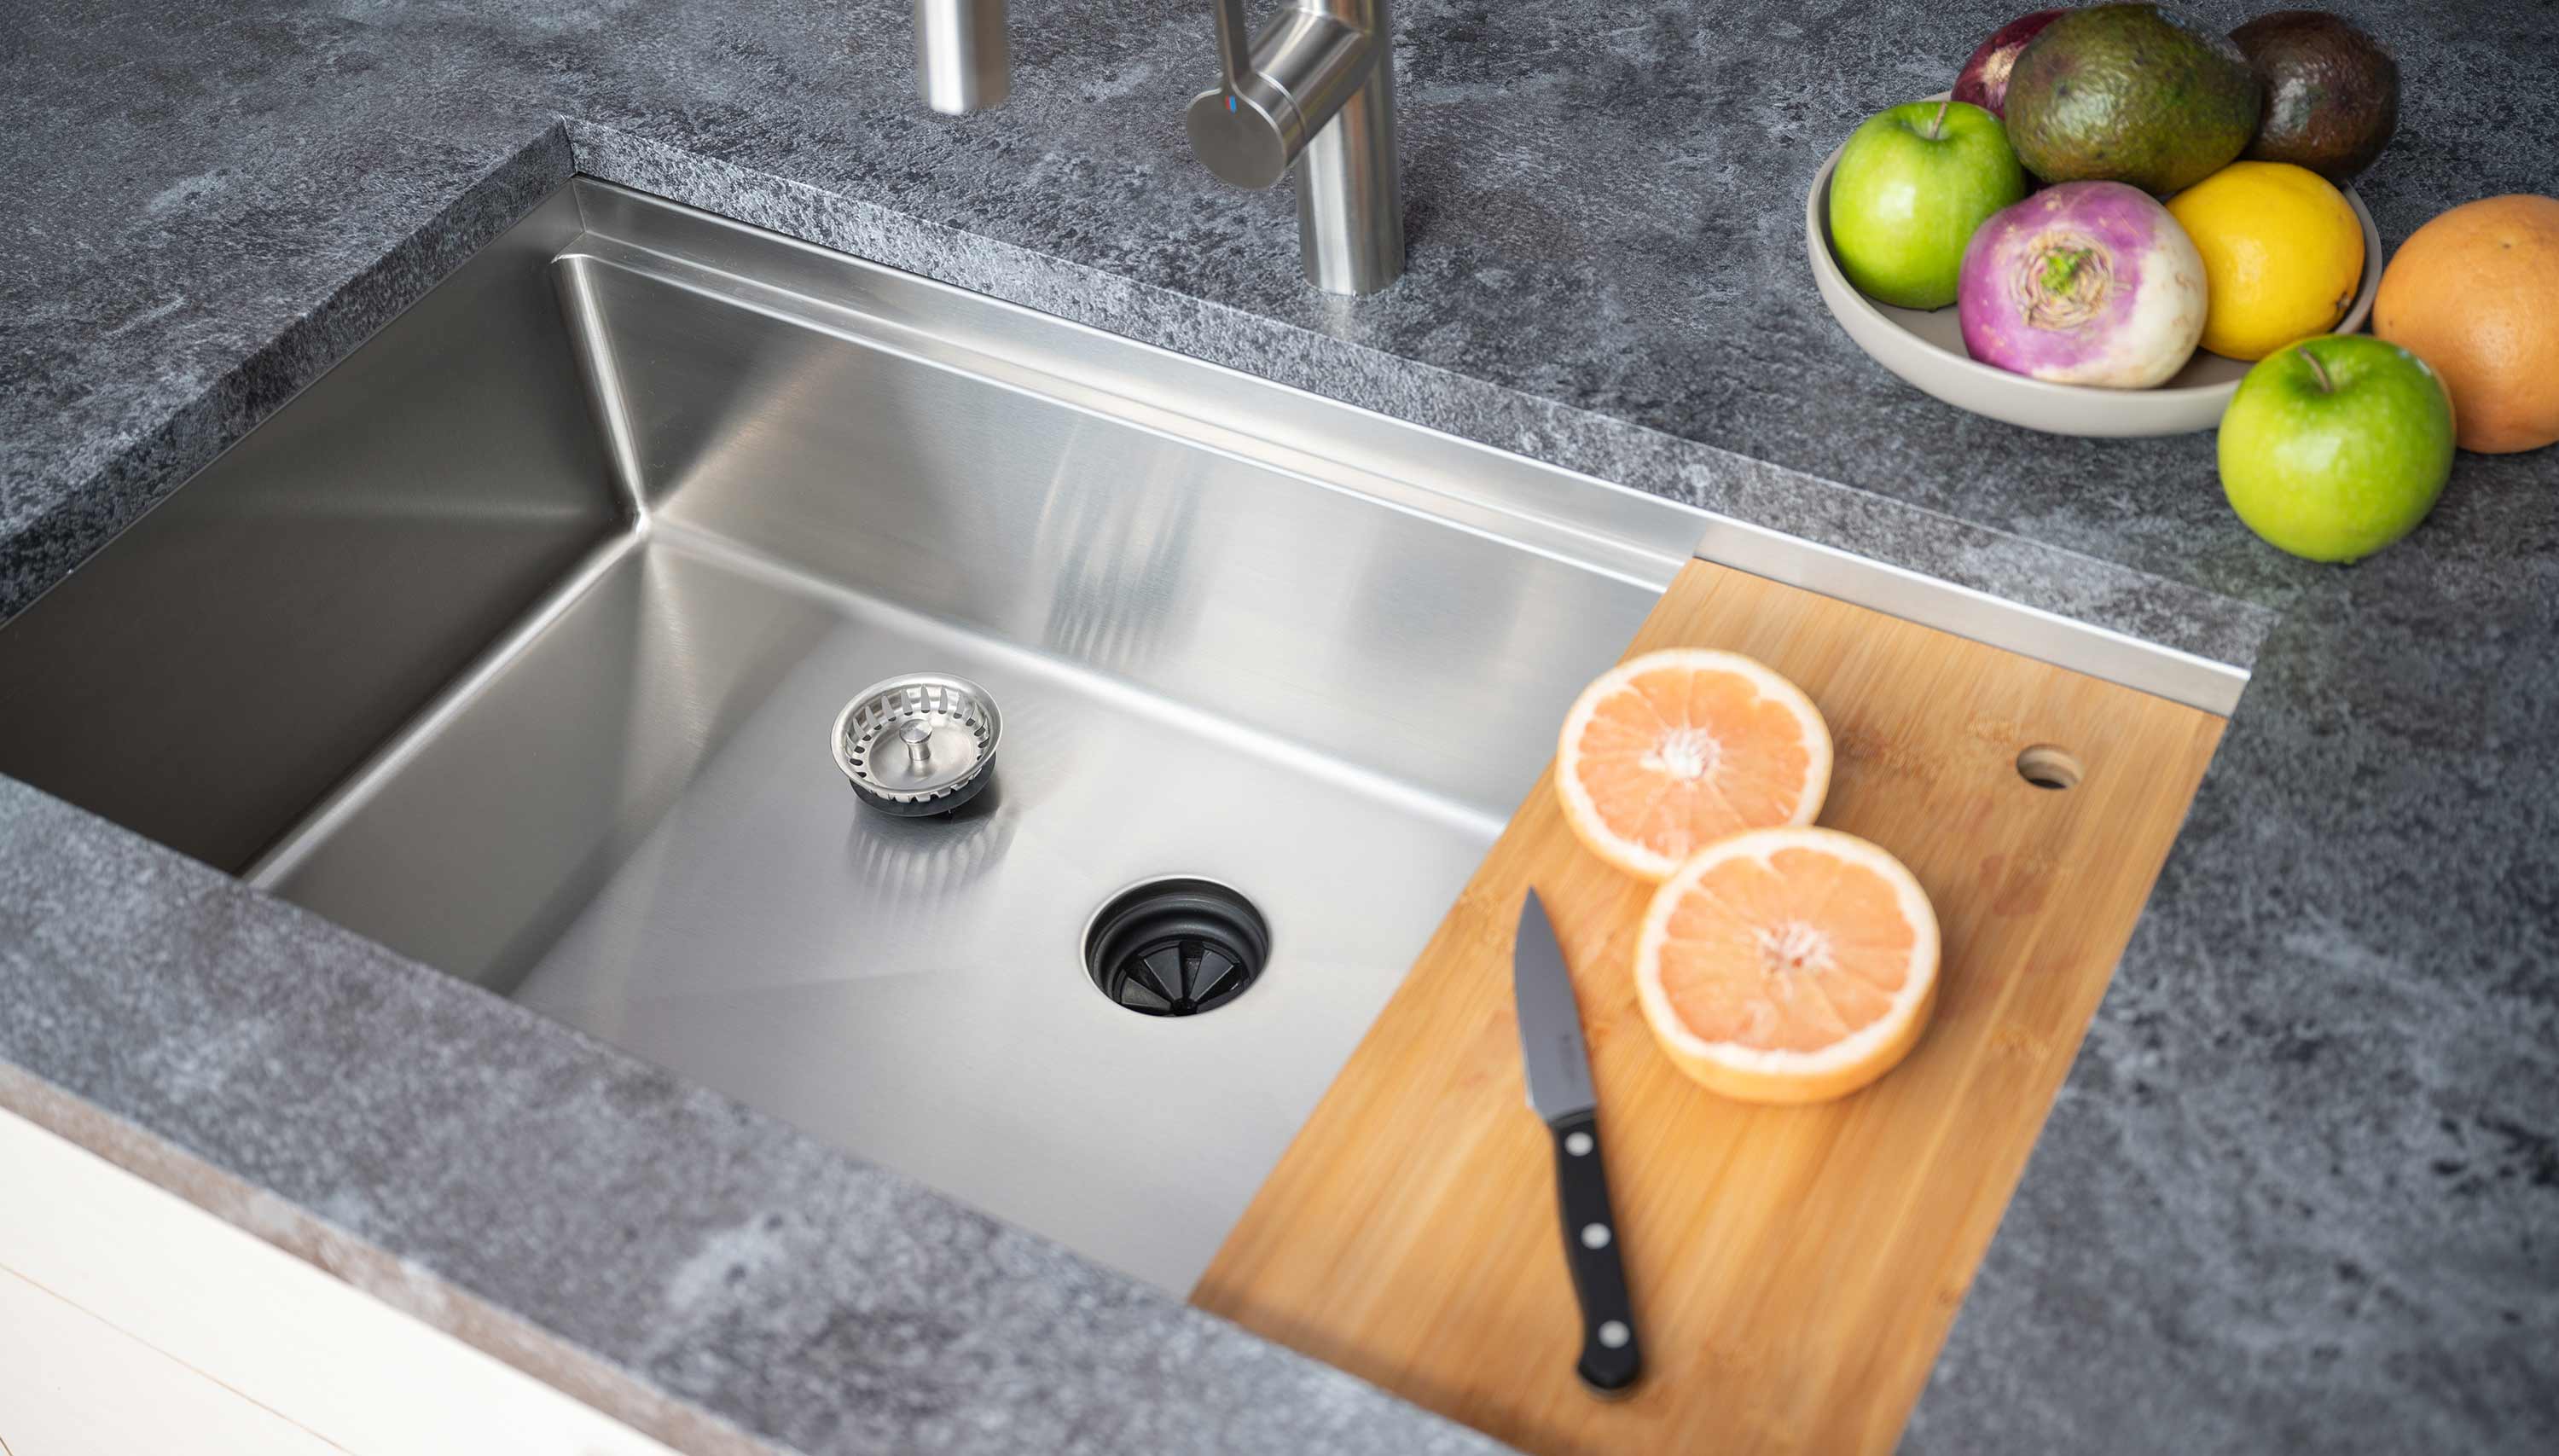 16 gauge stainless steel undermount workstation sink with seamless drain and easy to clean round corners